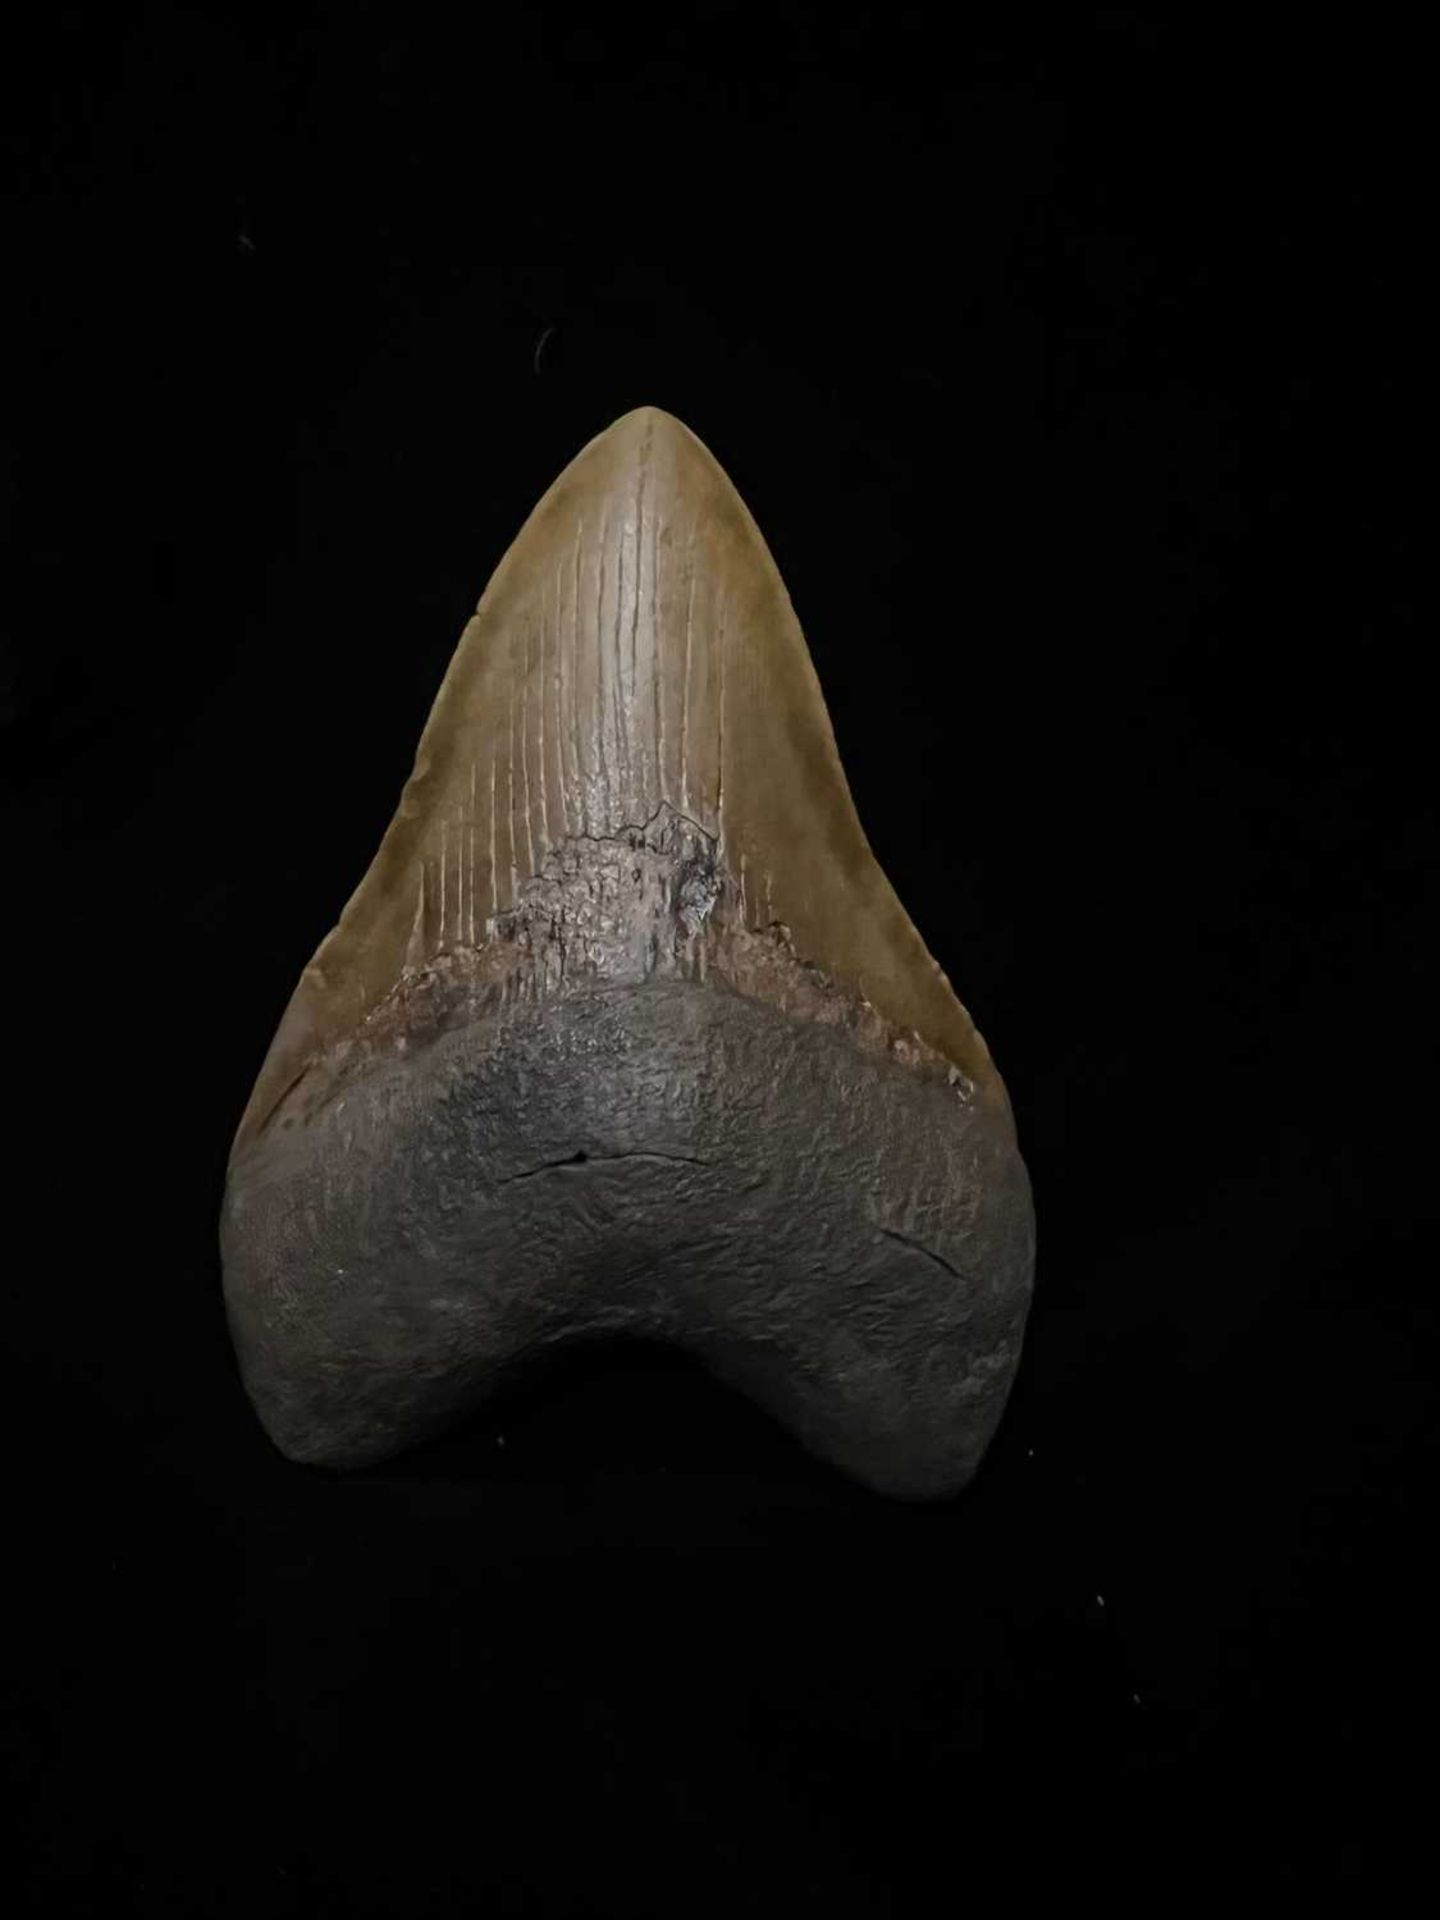 AN EXTINCT FOSSILISED MEGALODON SHARK TOOTH - Image 2 of 5